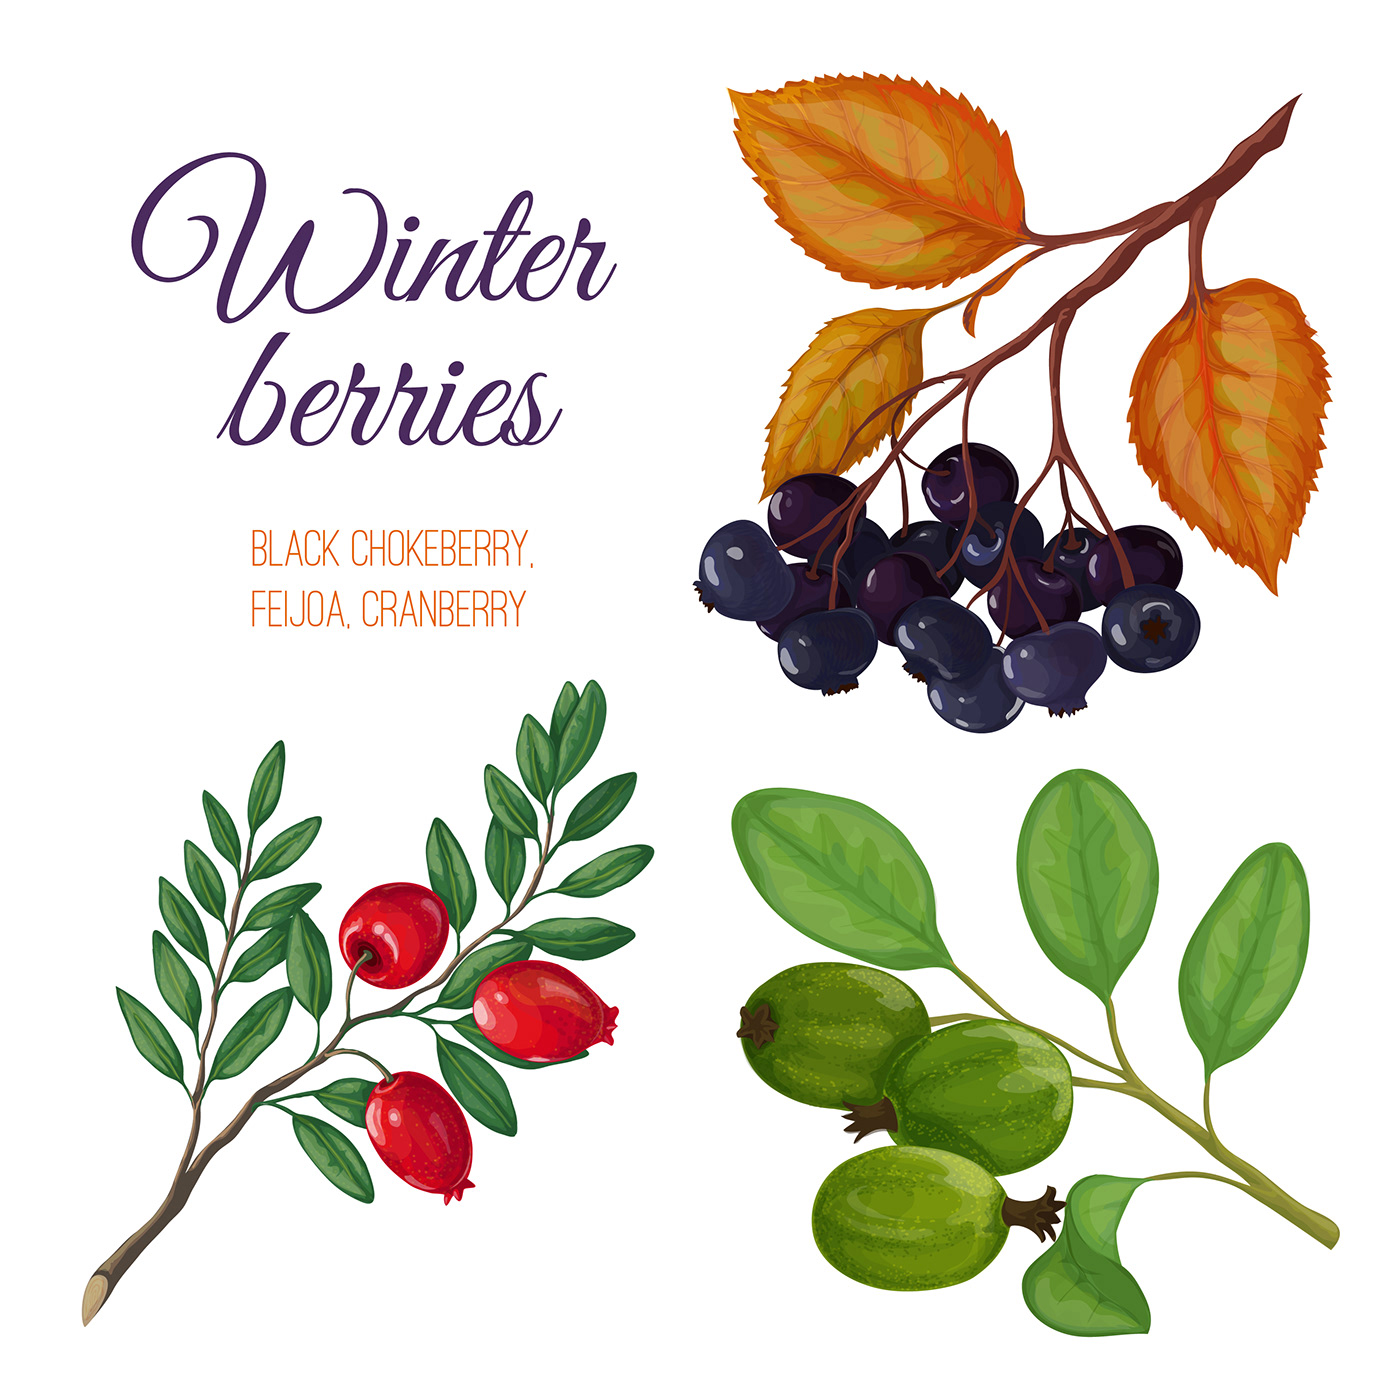 branches leaves berries winter berries snowy seasons vector objects